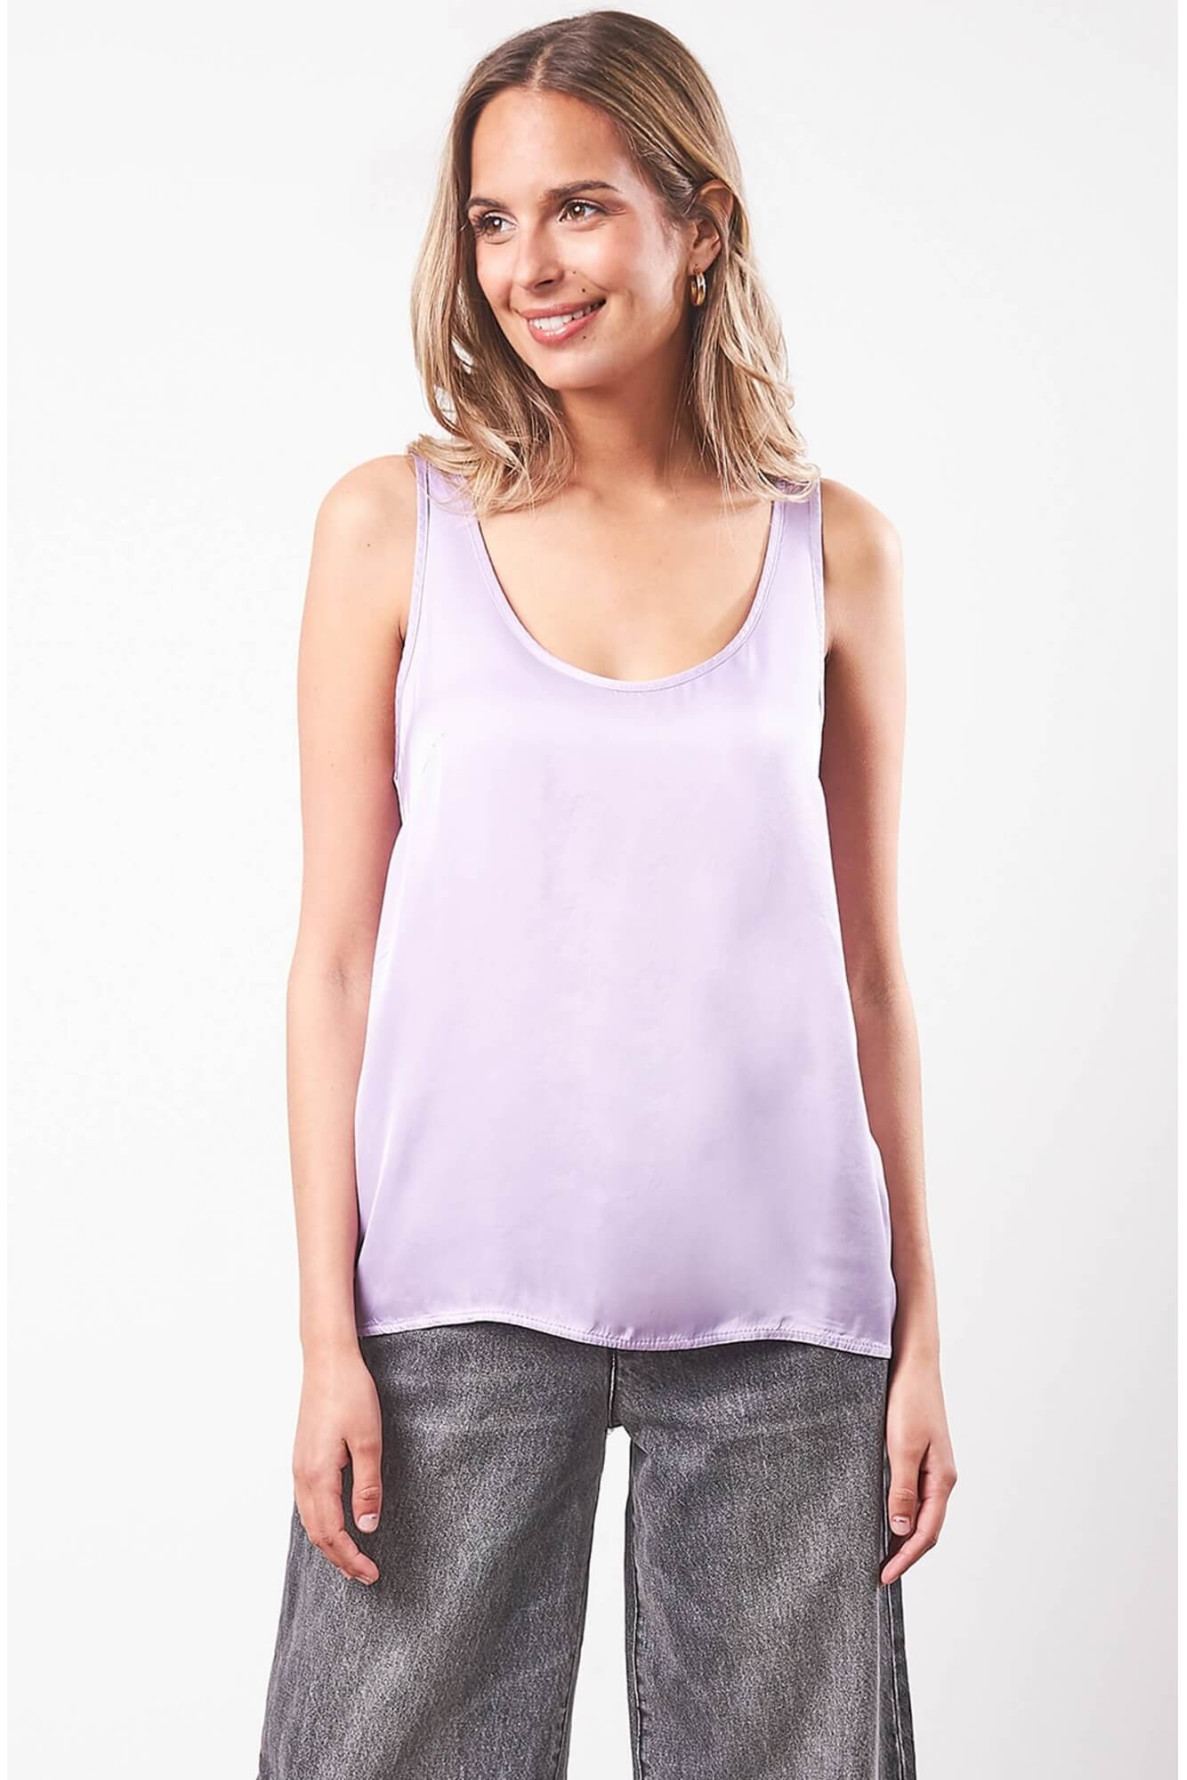 Top with thin straps - Love@me - 1 